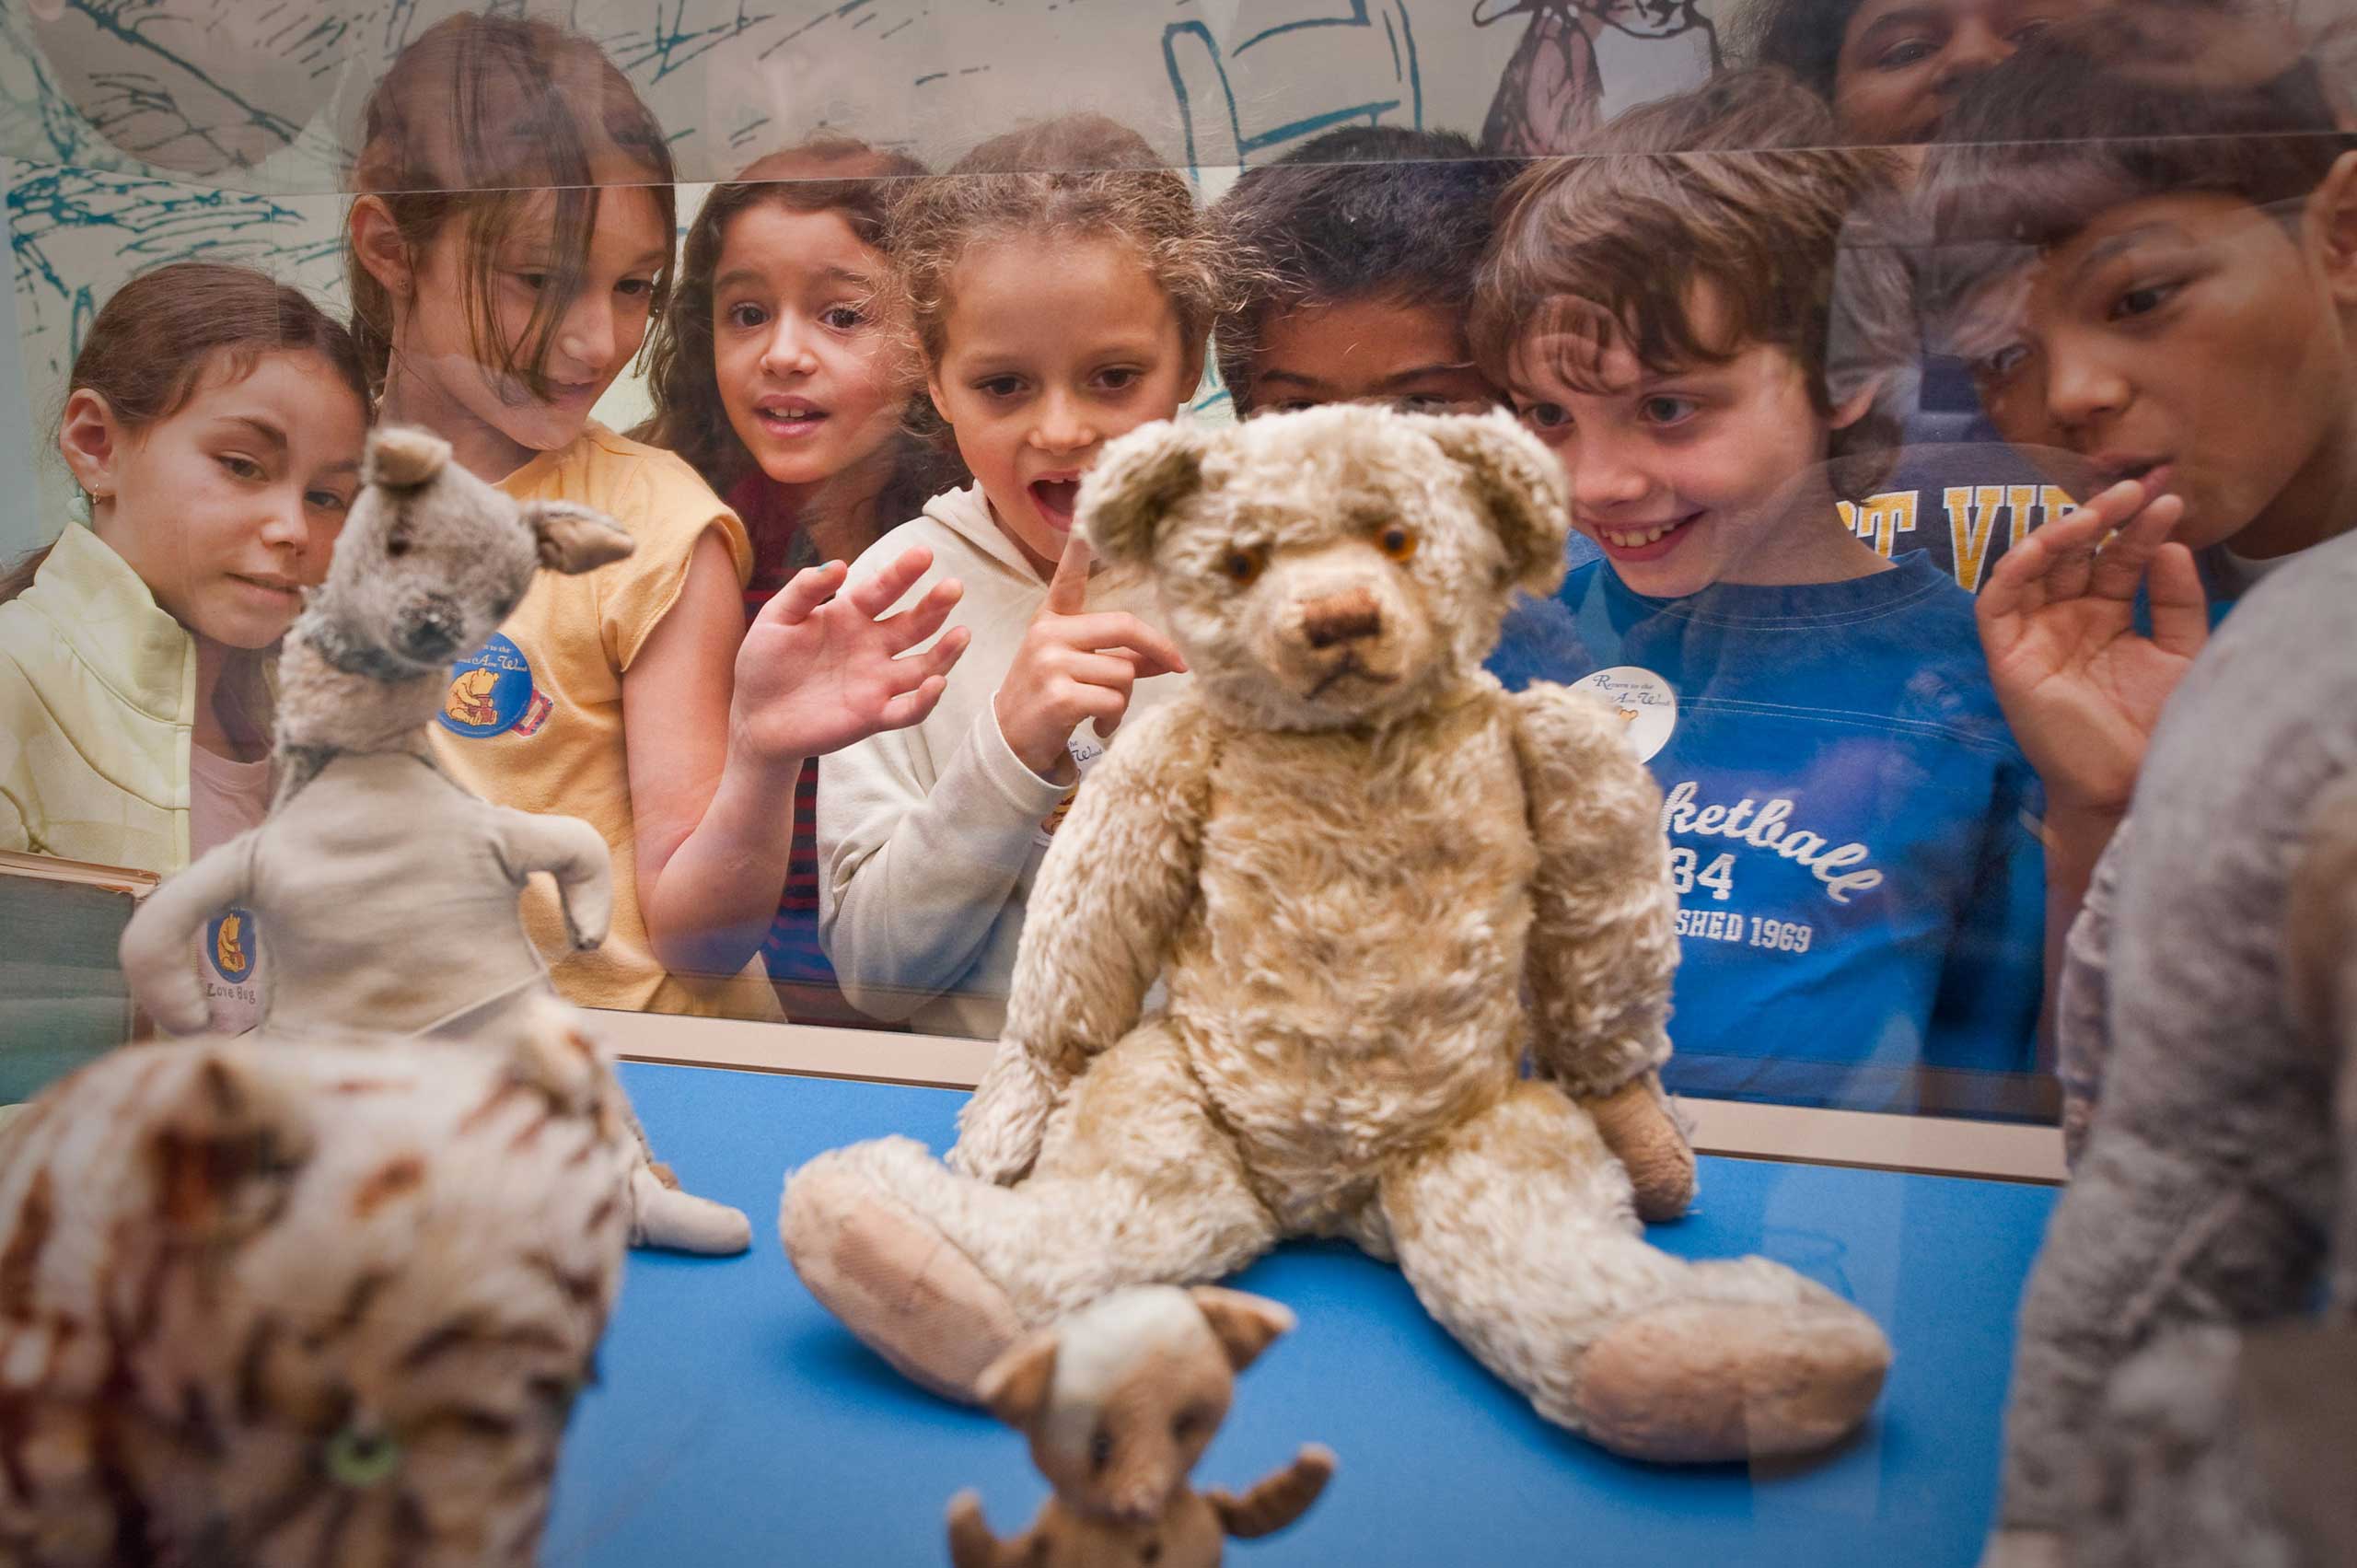 School children view the original Winnie the Pooh stuffed animals at the New York Public Library in 2009. (Marc Bryan-Brown—WireImage/Getty Images)